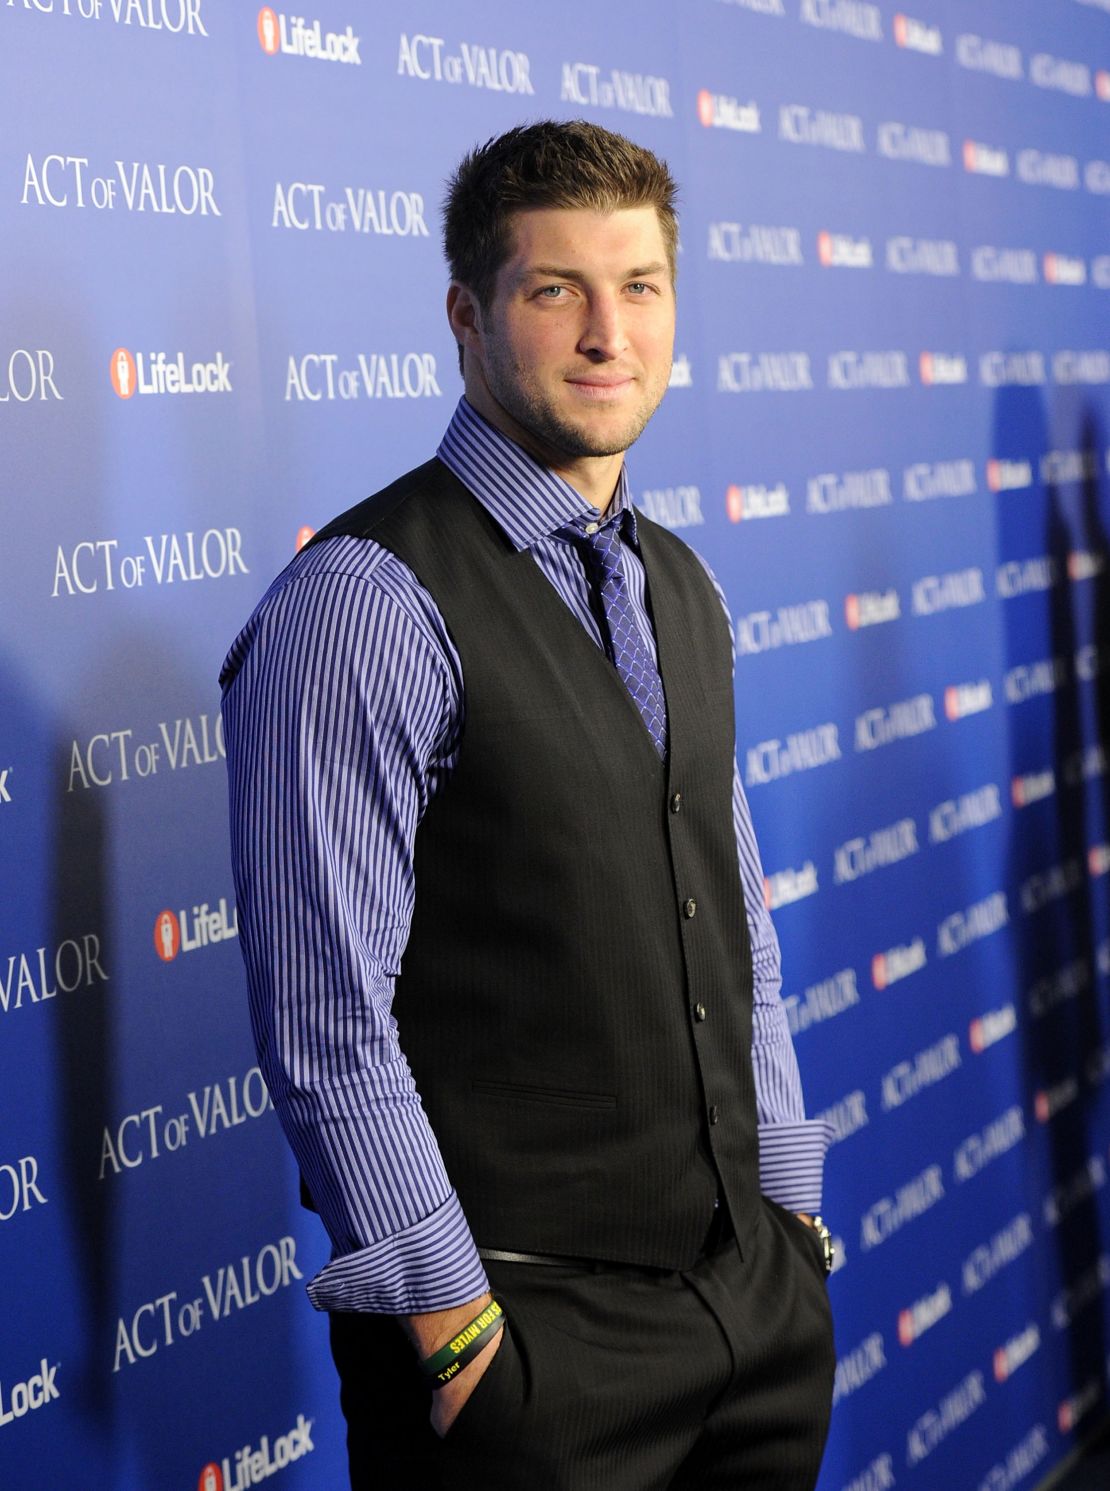 Tim Tebow at the 2012 premiere of "Act Of Valor" in Hollywood, California.